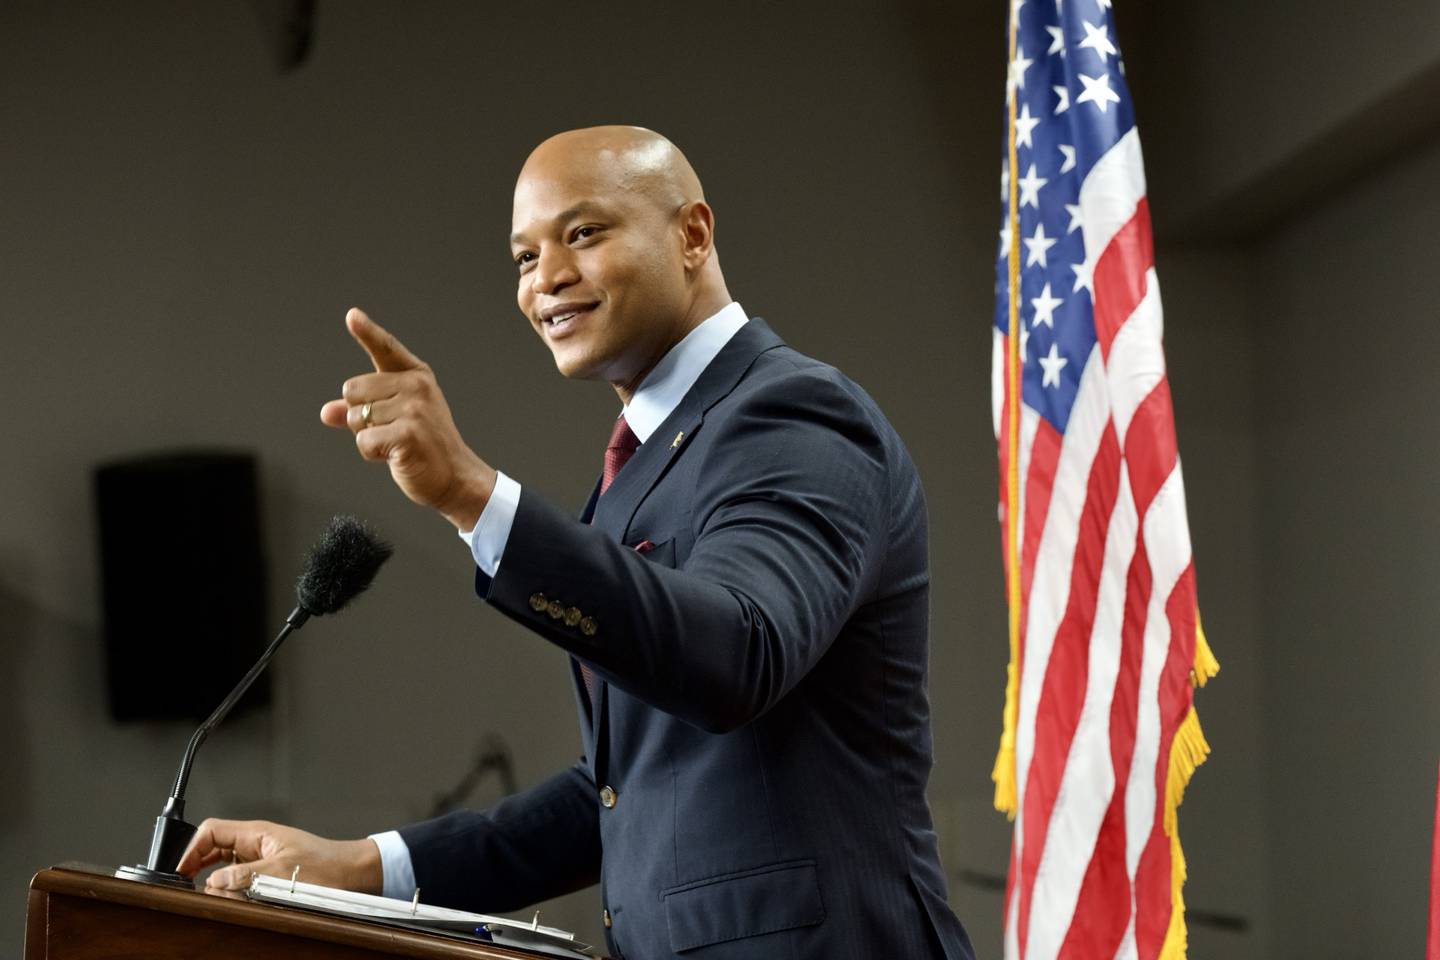 Wes Moore, wearing a dark suit and standing at a lectern, smiles and points with his left index finger. Behind him is a U.S. flag.